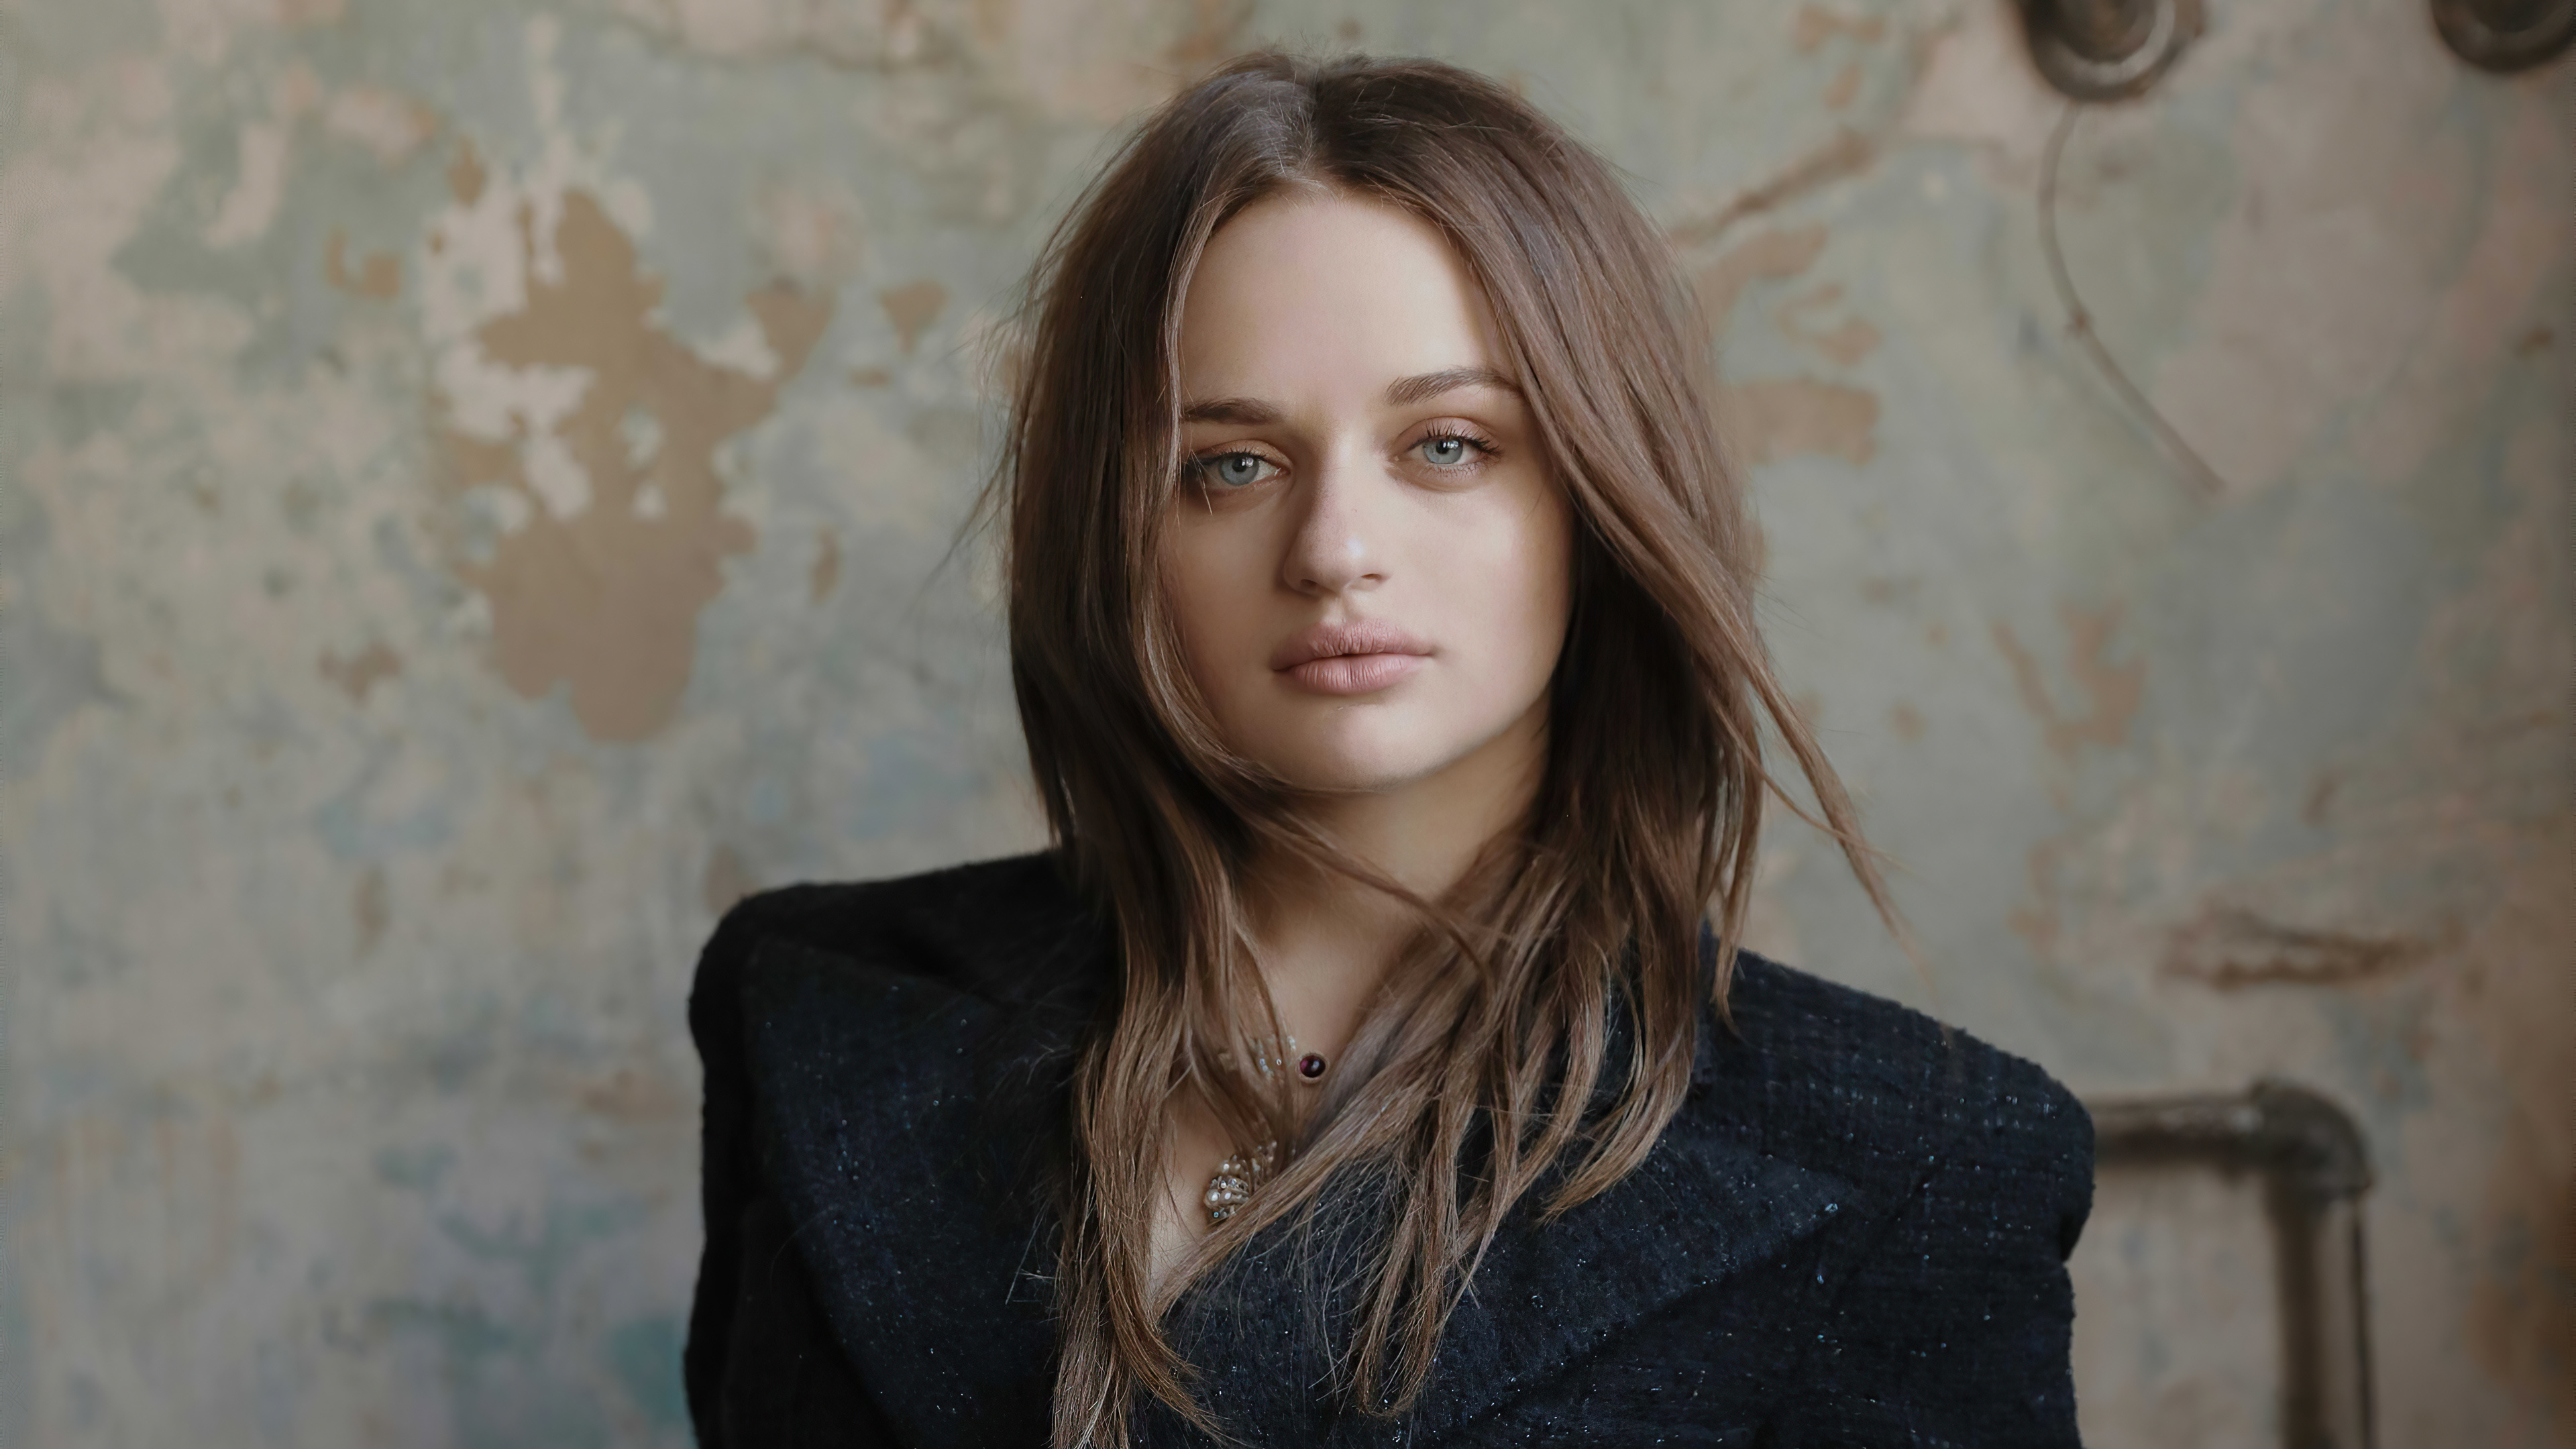 Joey King Wallpapers (55+ images inside)